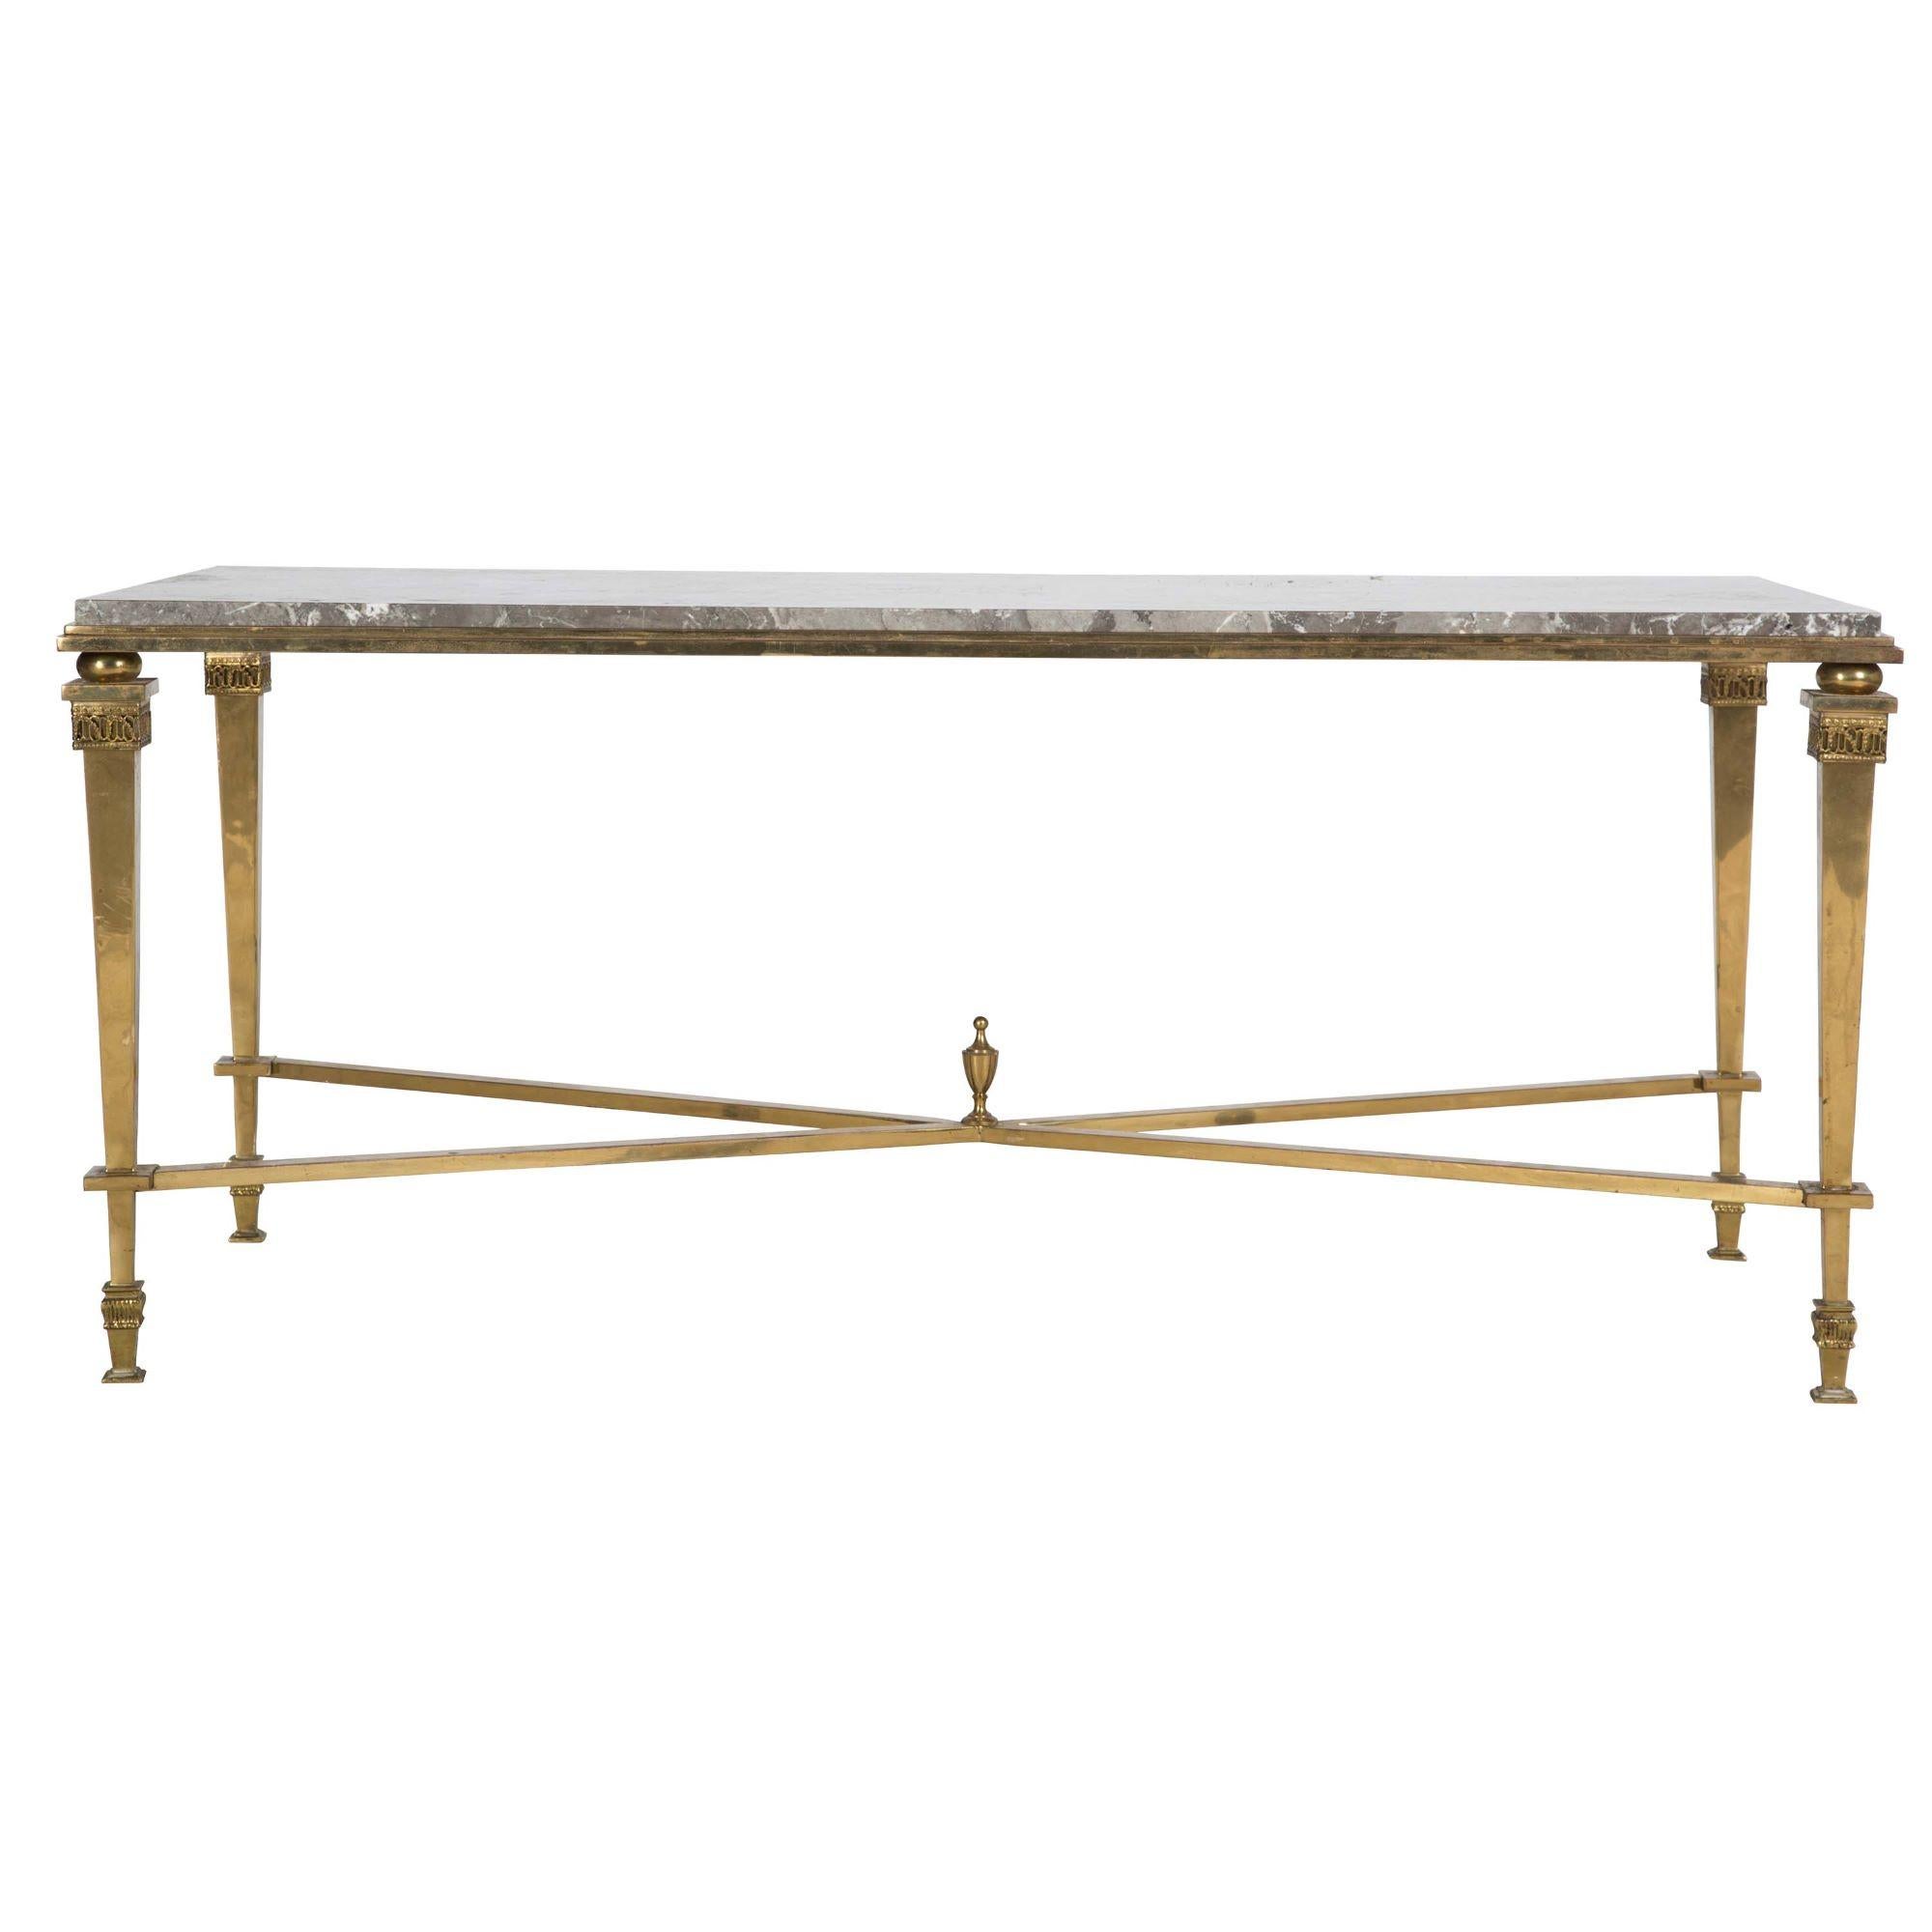 Handsome 20th century bronze coffee table with grey marble top.